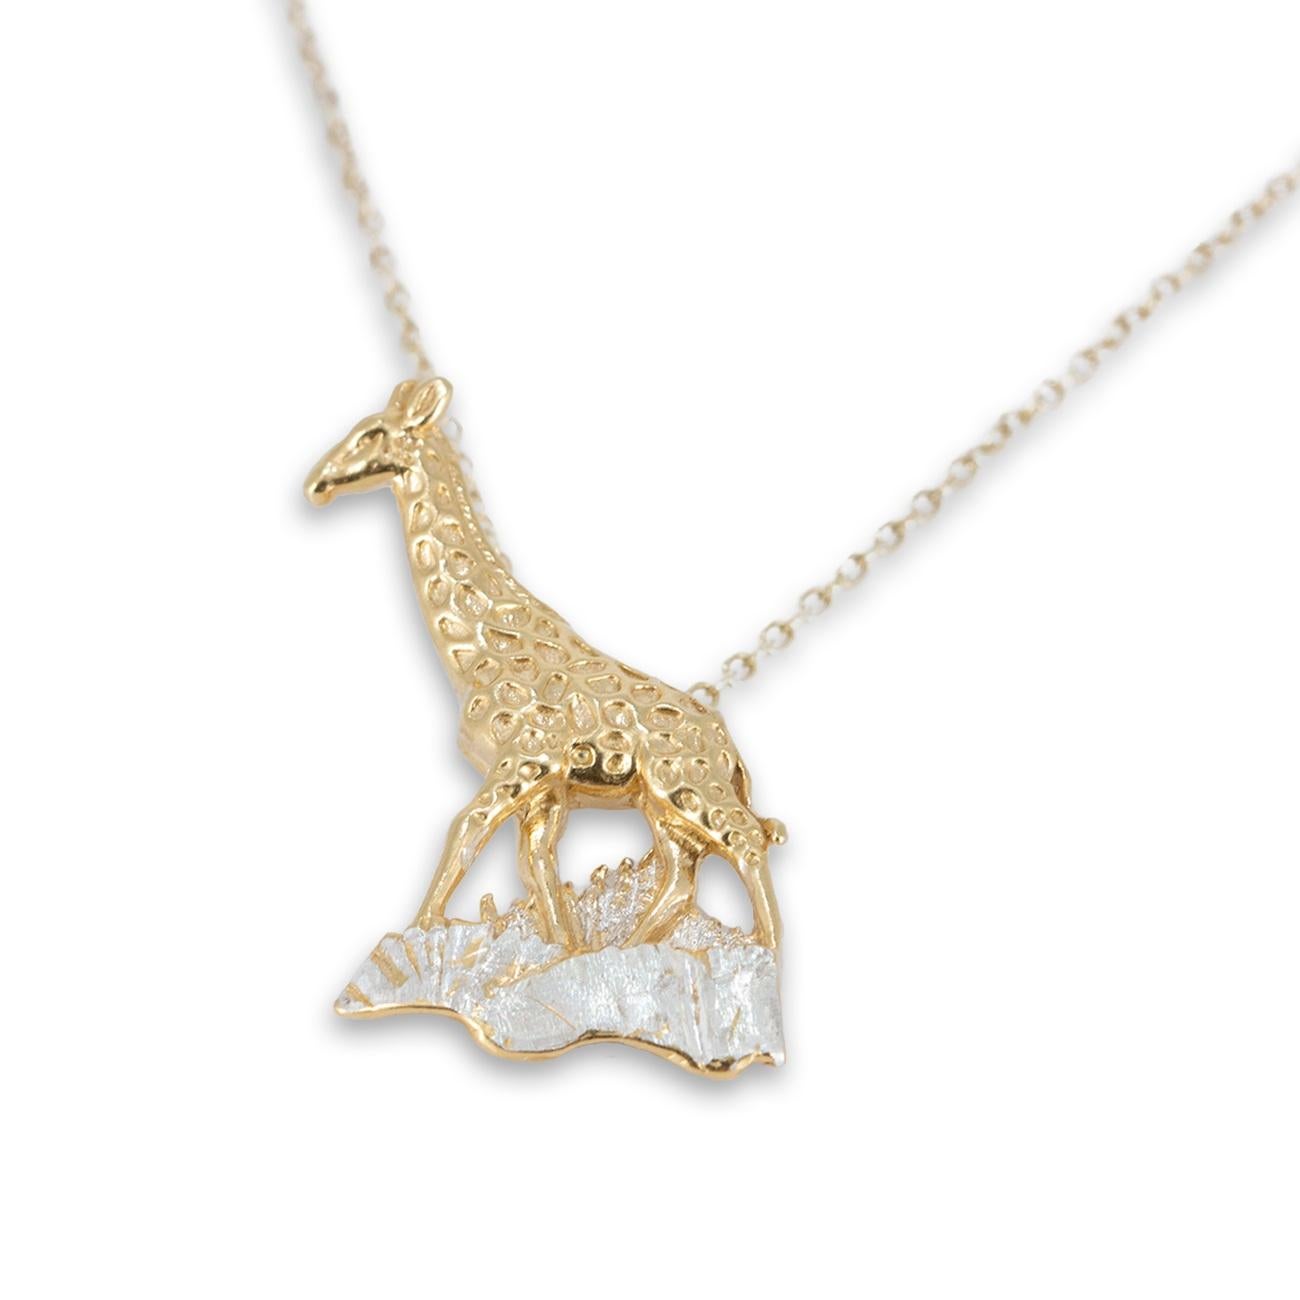 Contemporary Giraffe Pendant in 18 carat Gold on Sterling Silver For Sale